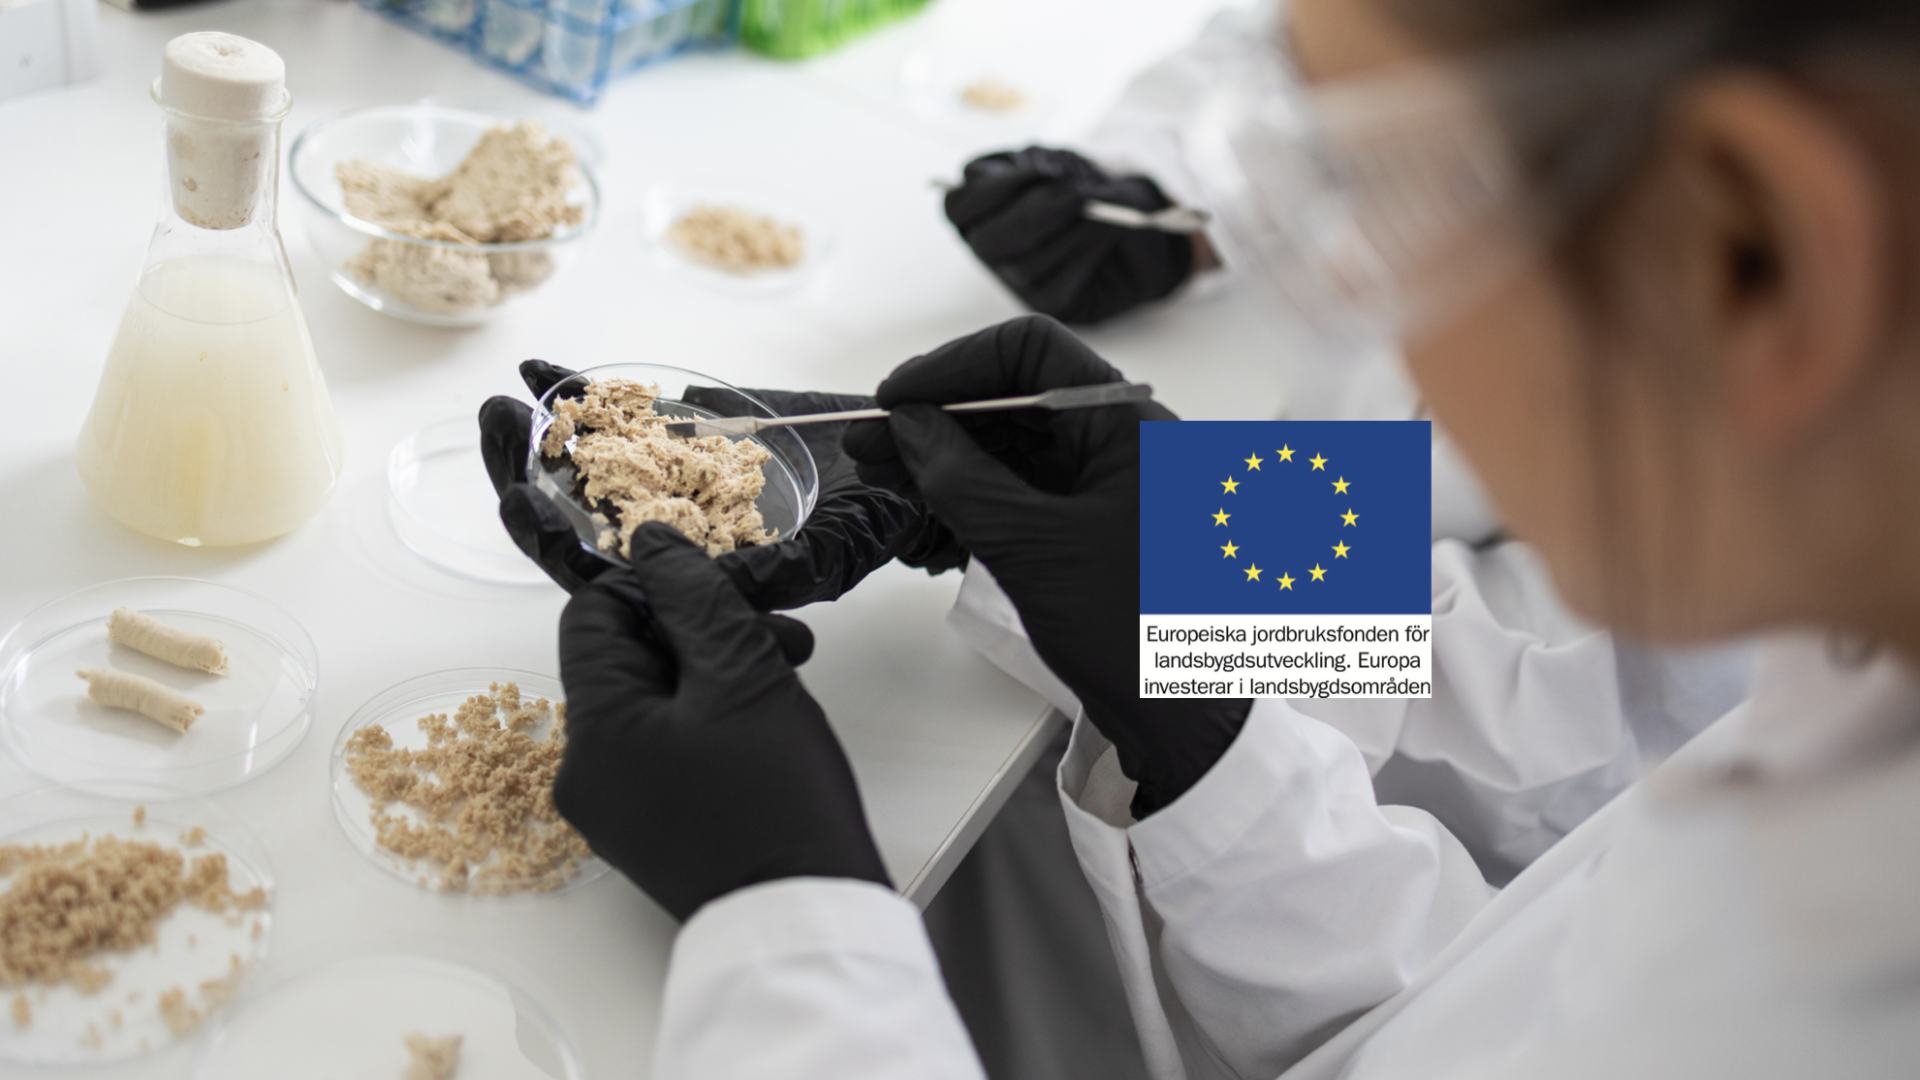 Mycorena Awarded Research Funding to Deepen the Industry Knowledge of Mycoprotein Nutrition